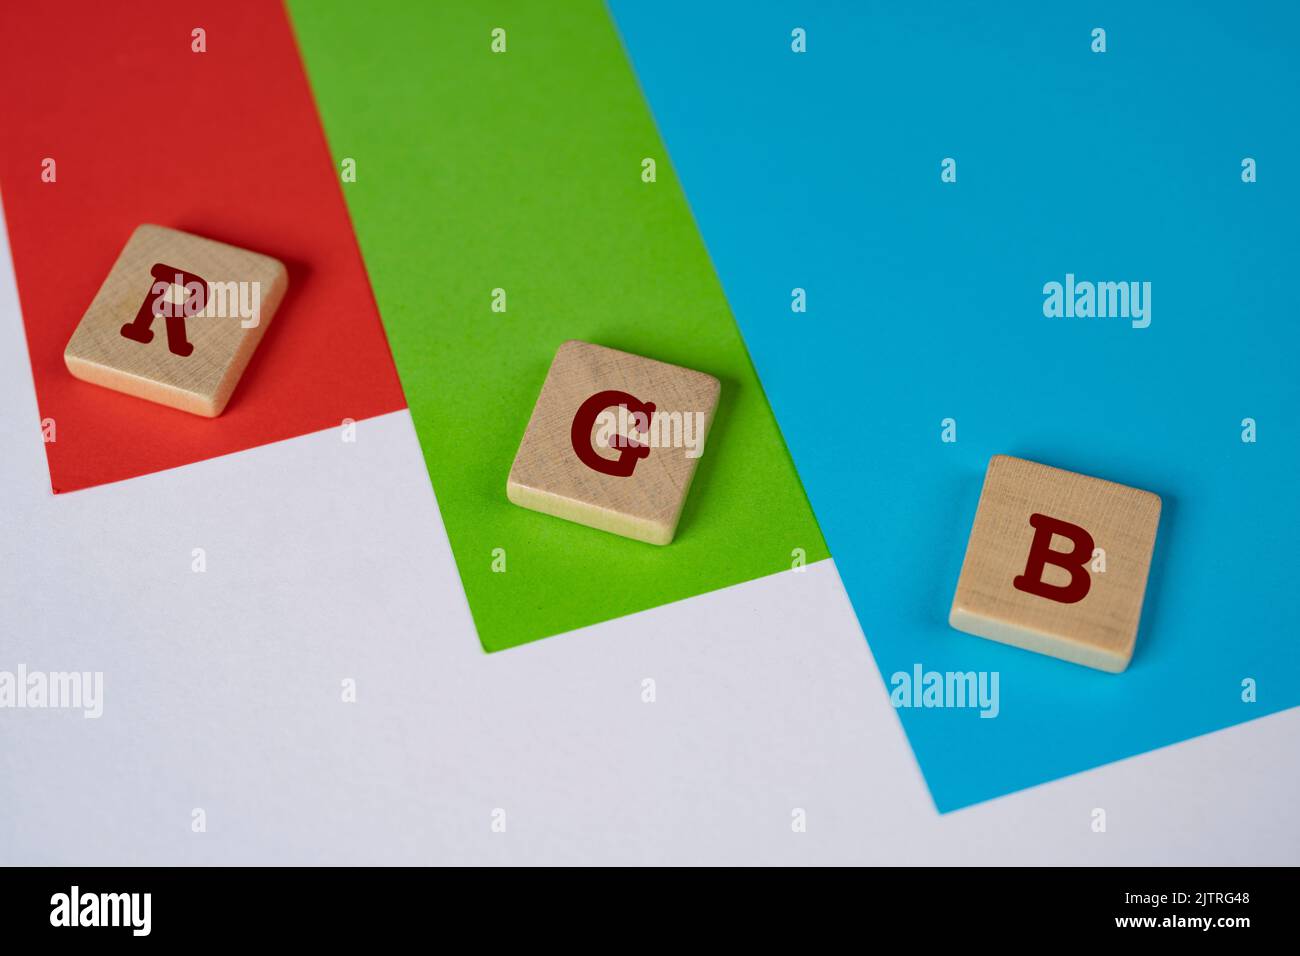 RGB color space. The letters R G and B on a wooden towel on a red, green, and blue background Stock Photo